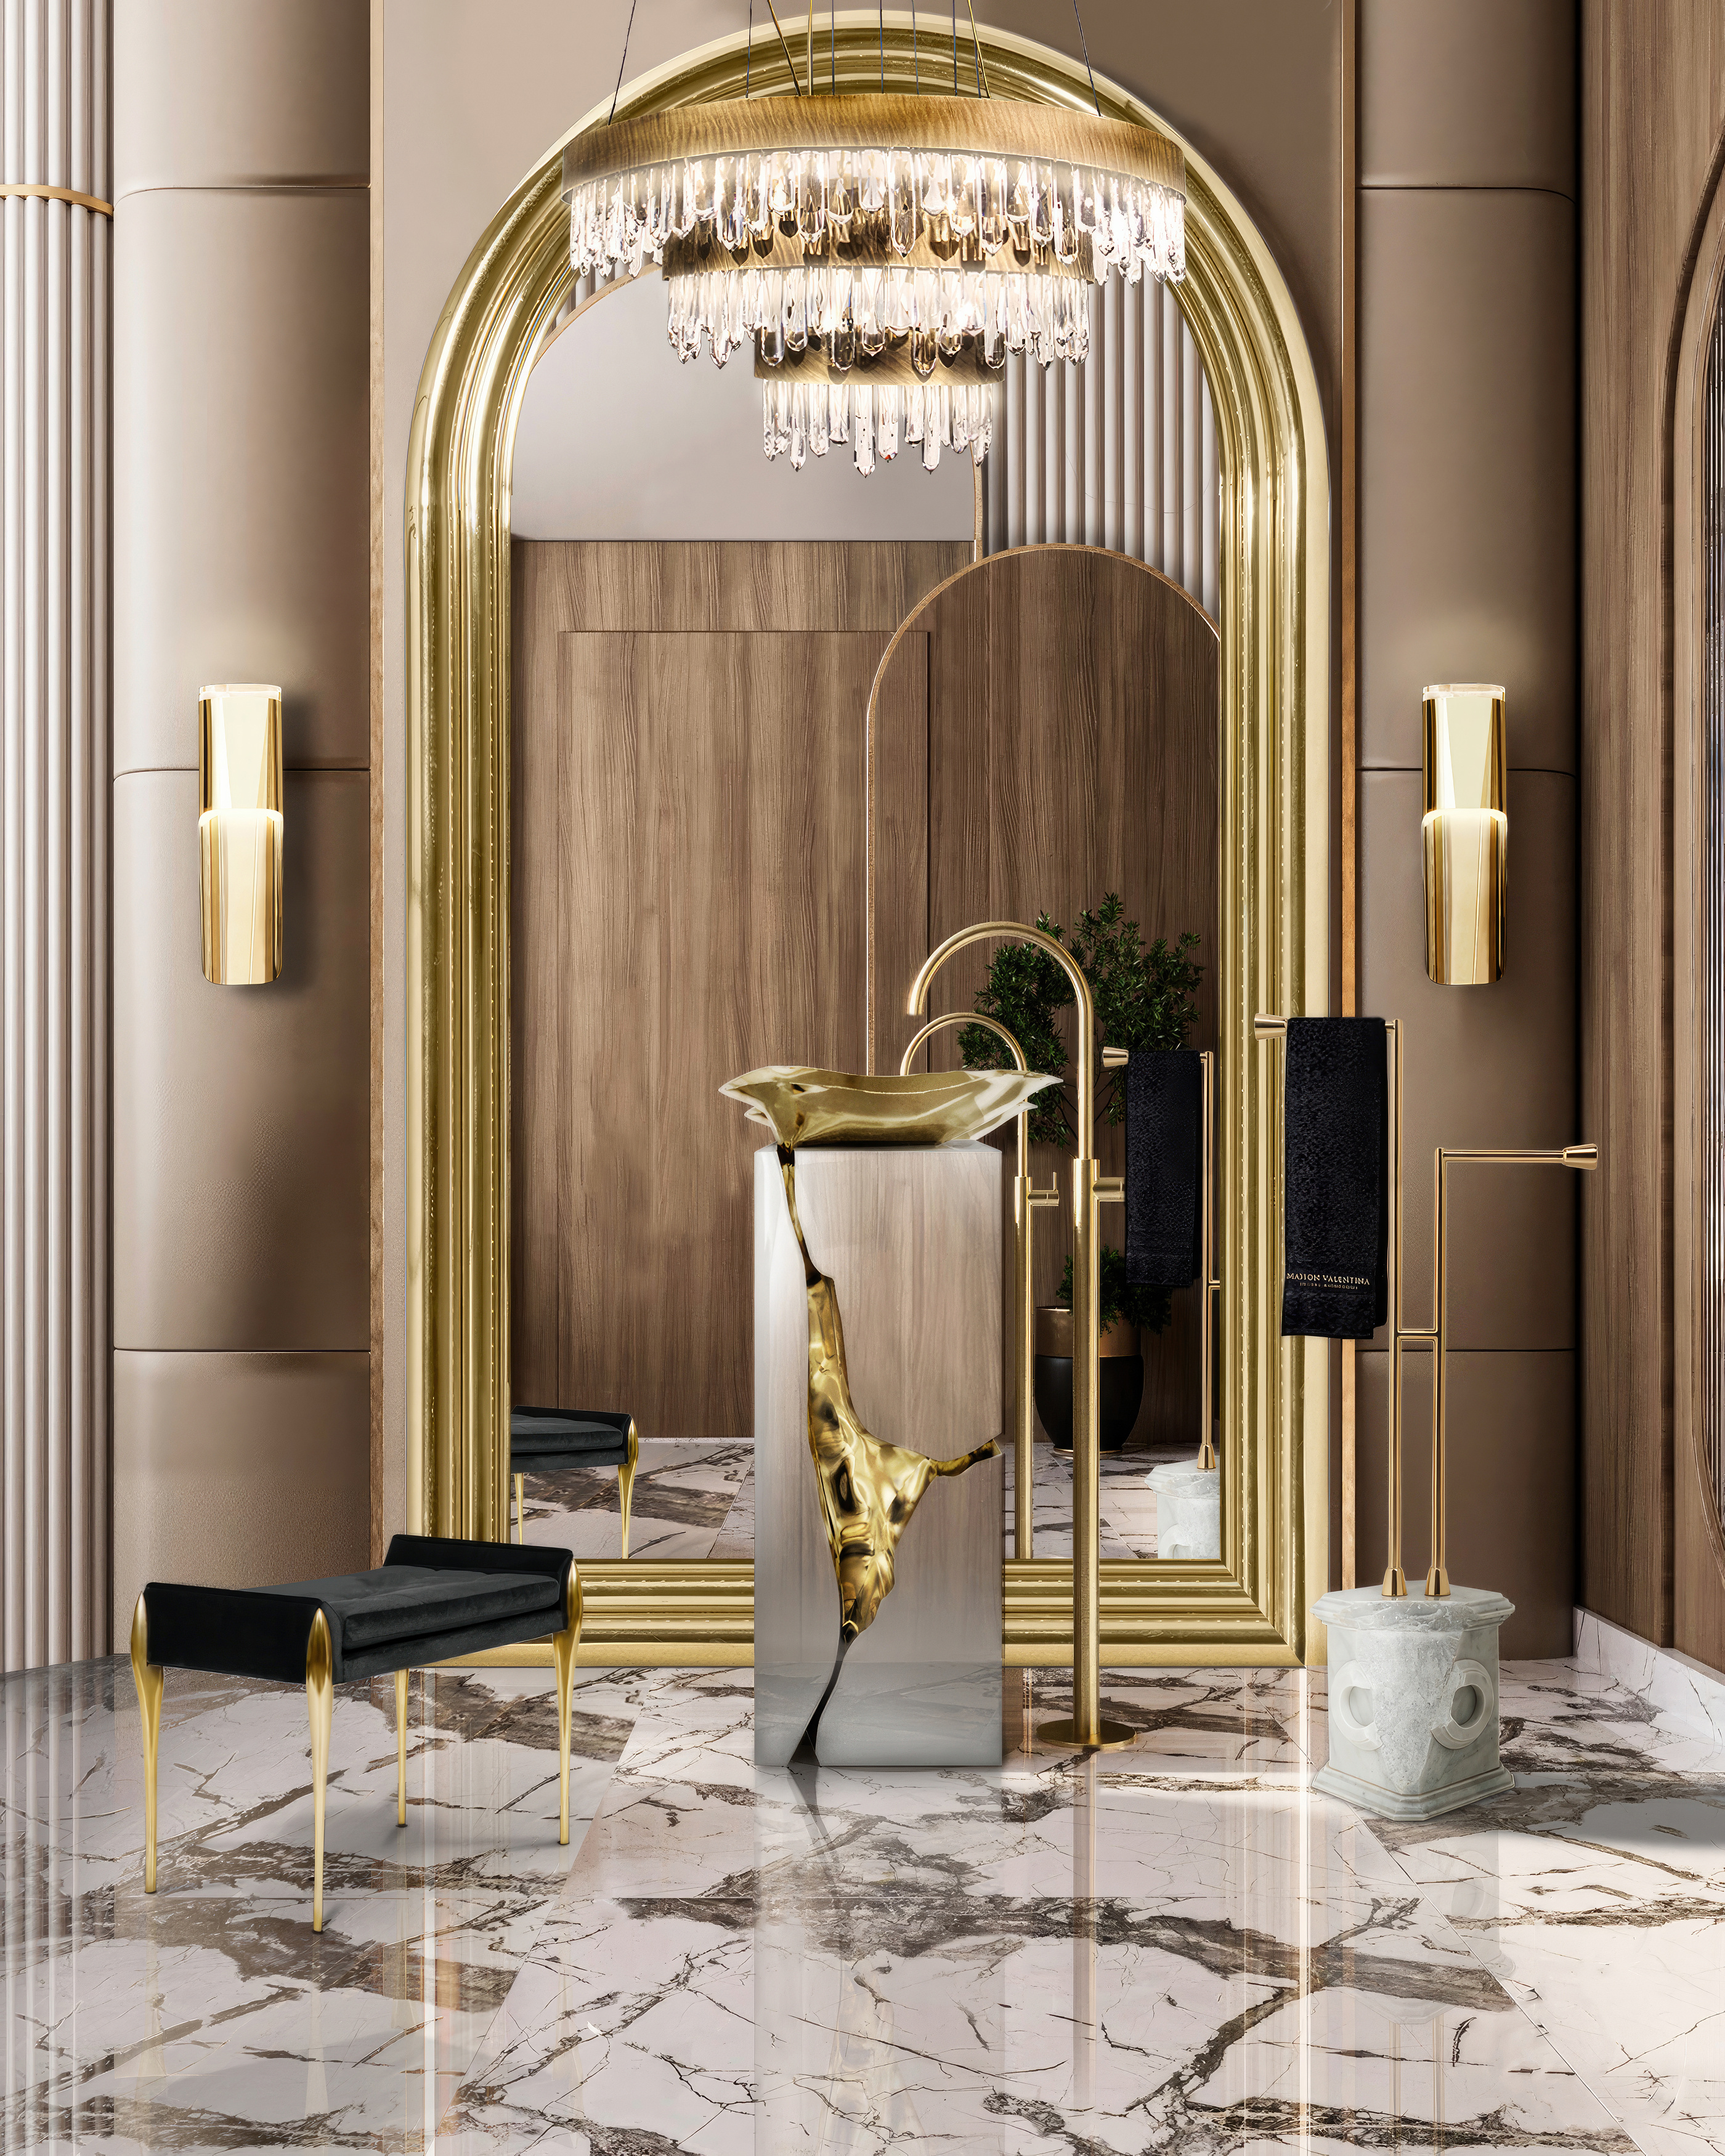 Luxury Bathroom with Golden Accents - Home'Society